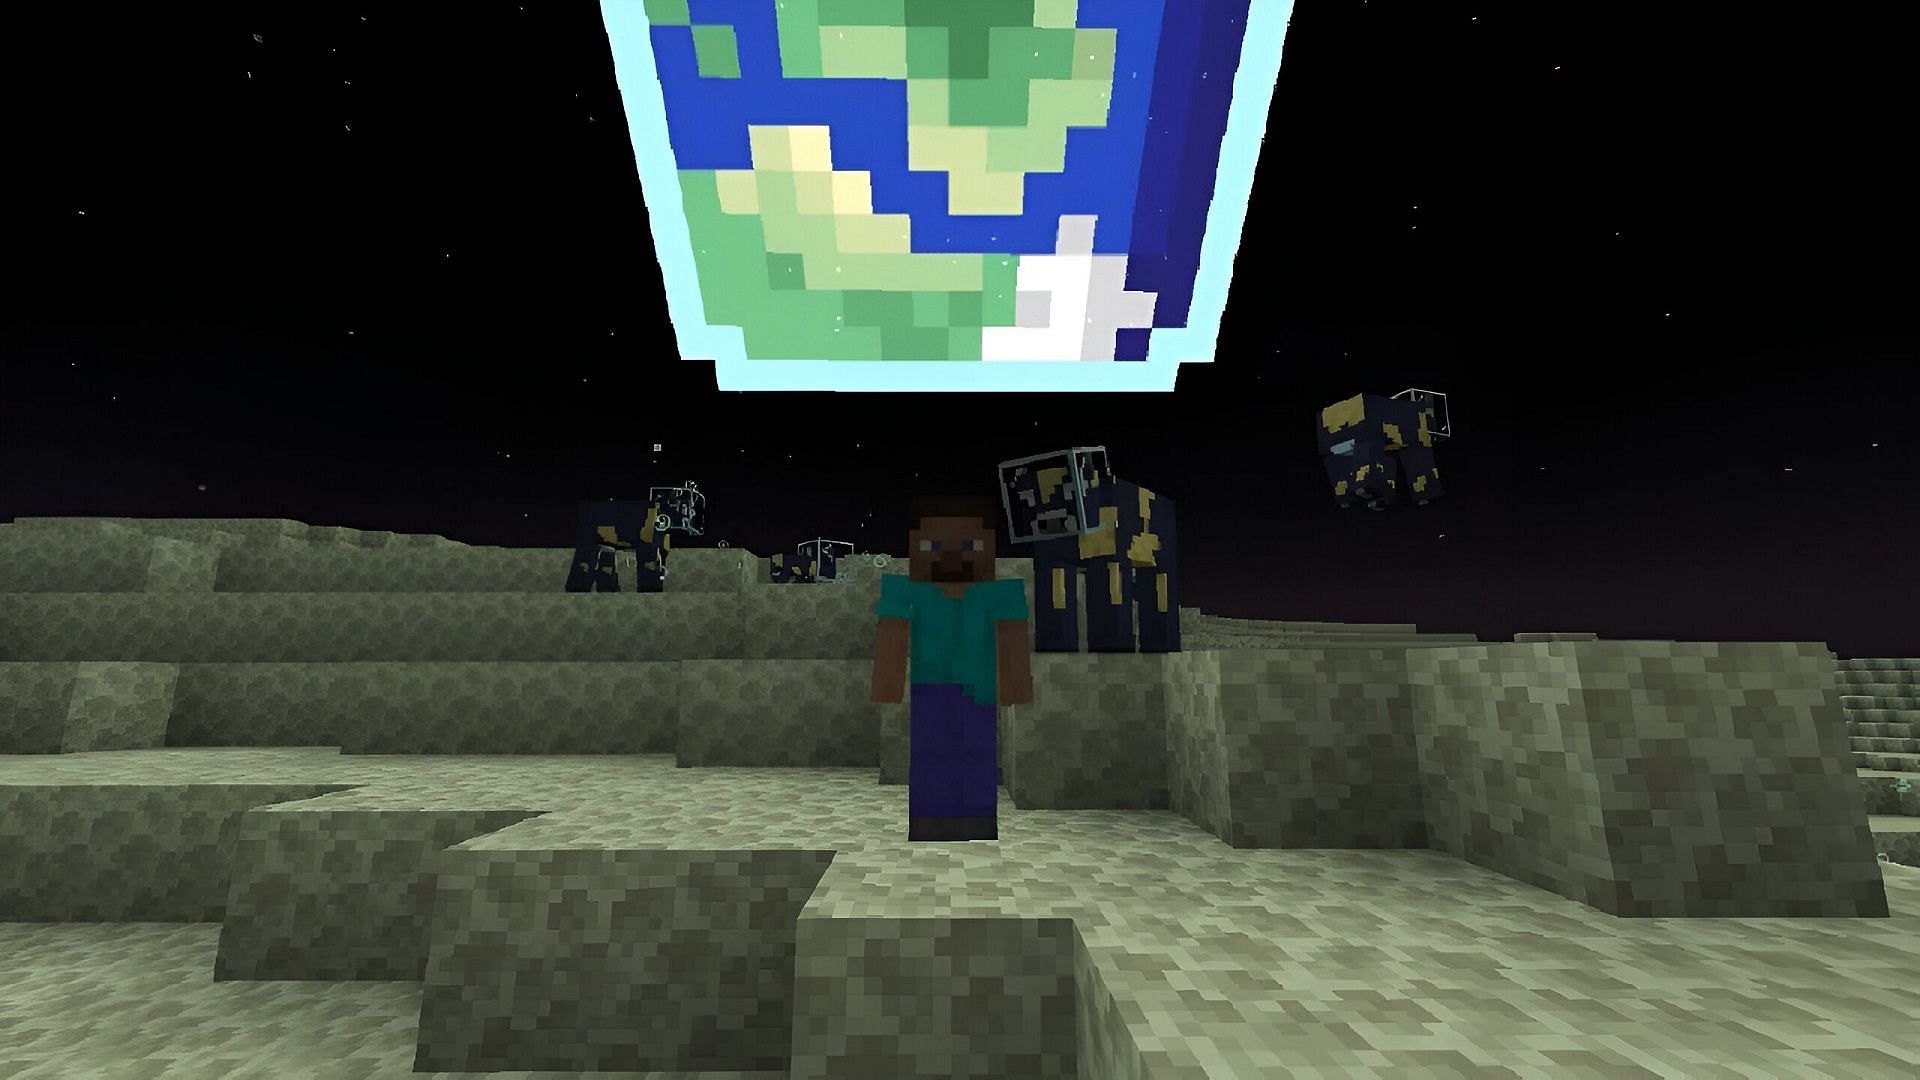 Minecraft's Moon has potential to be the next dimension